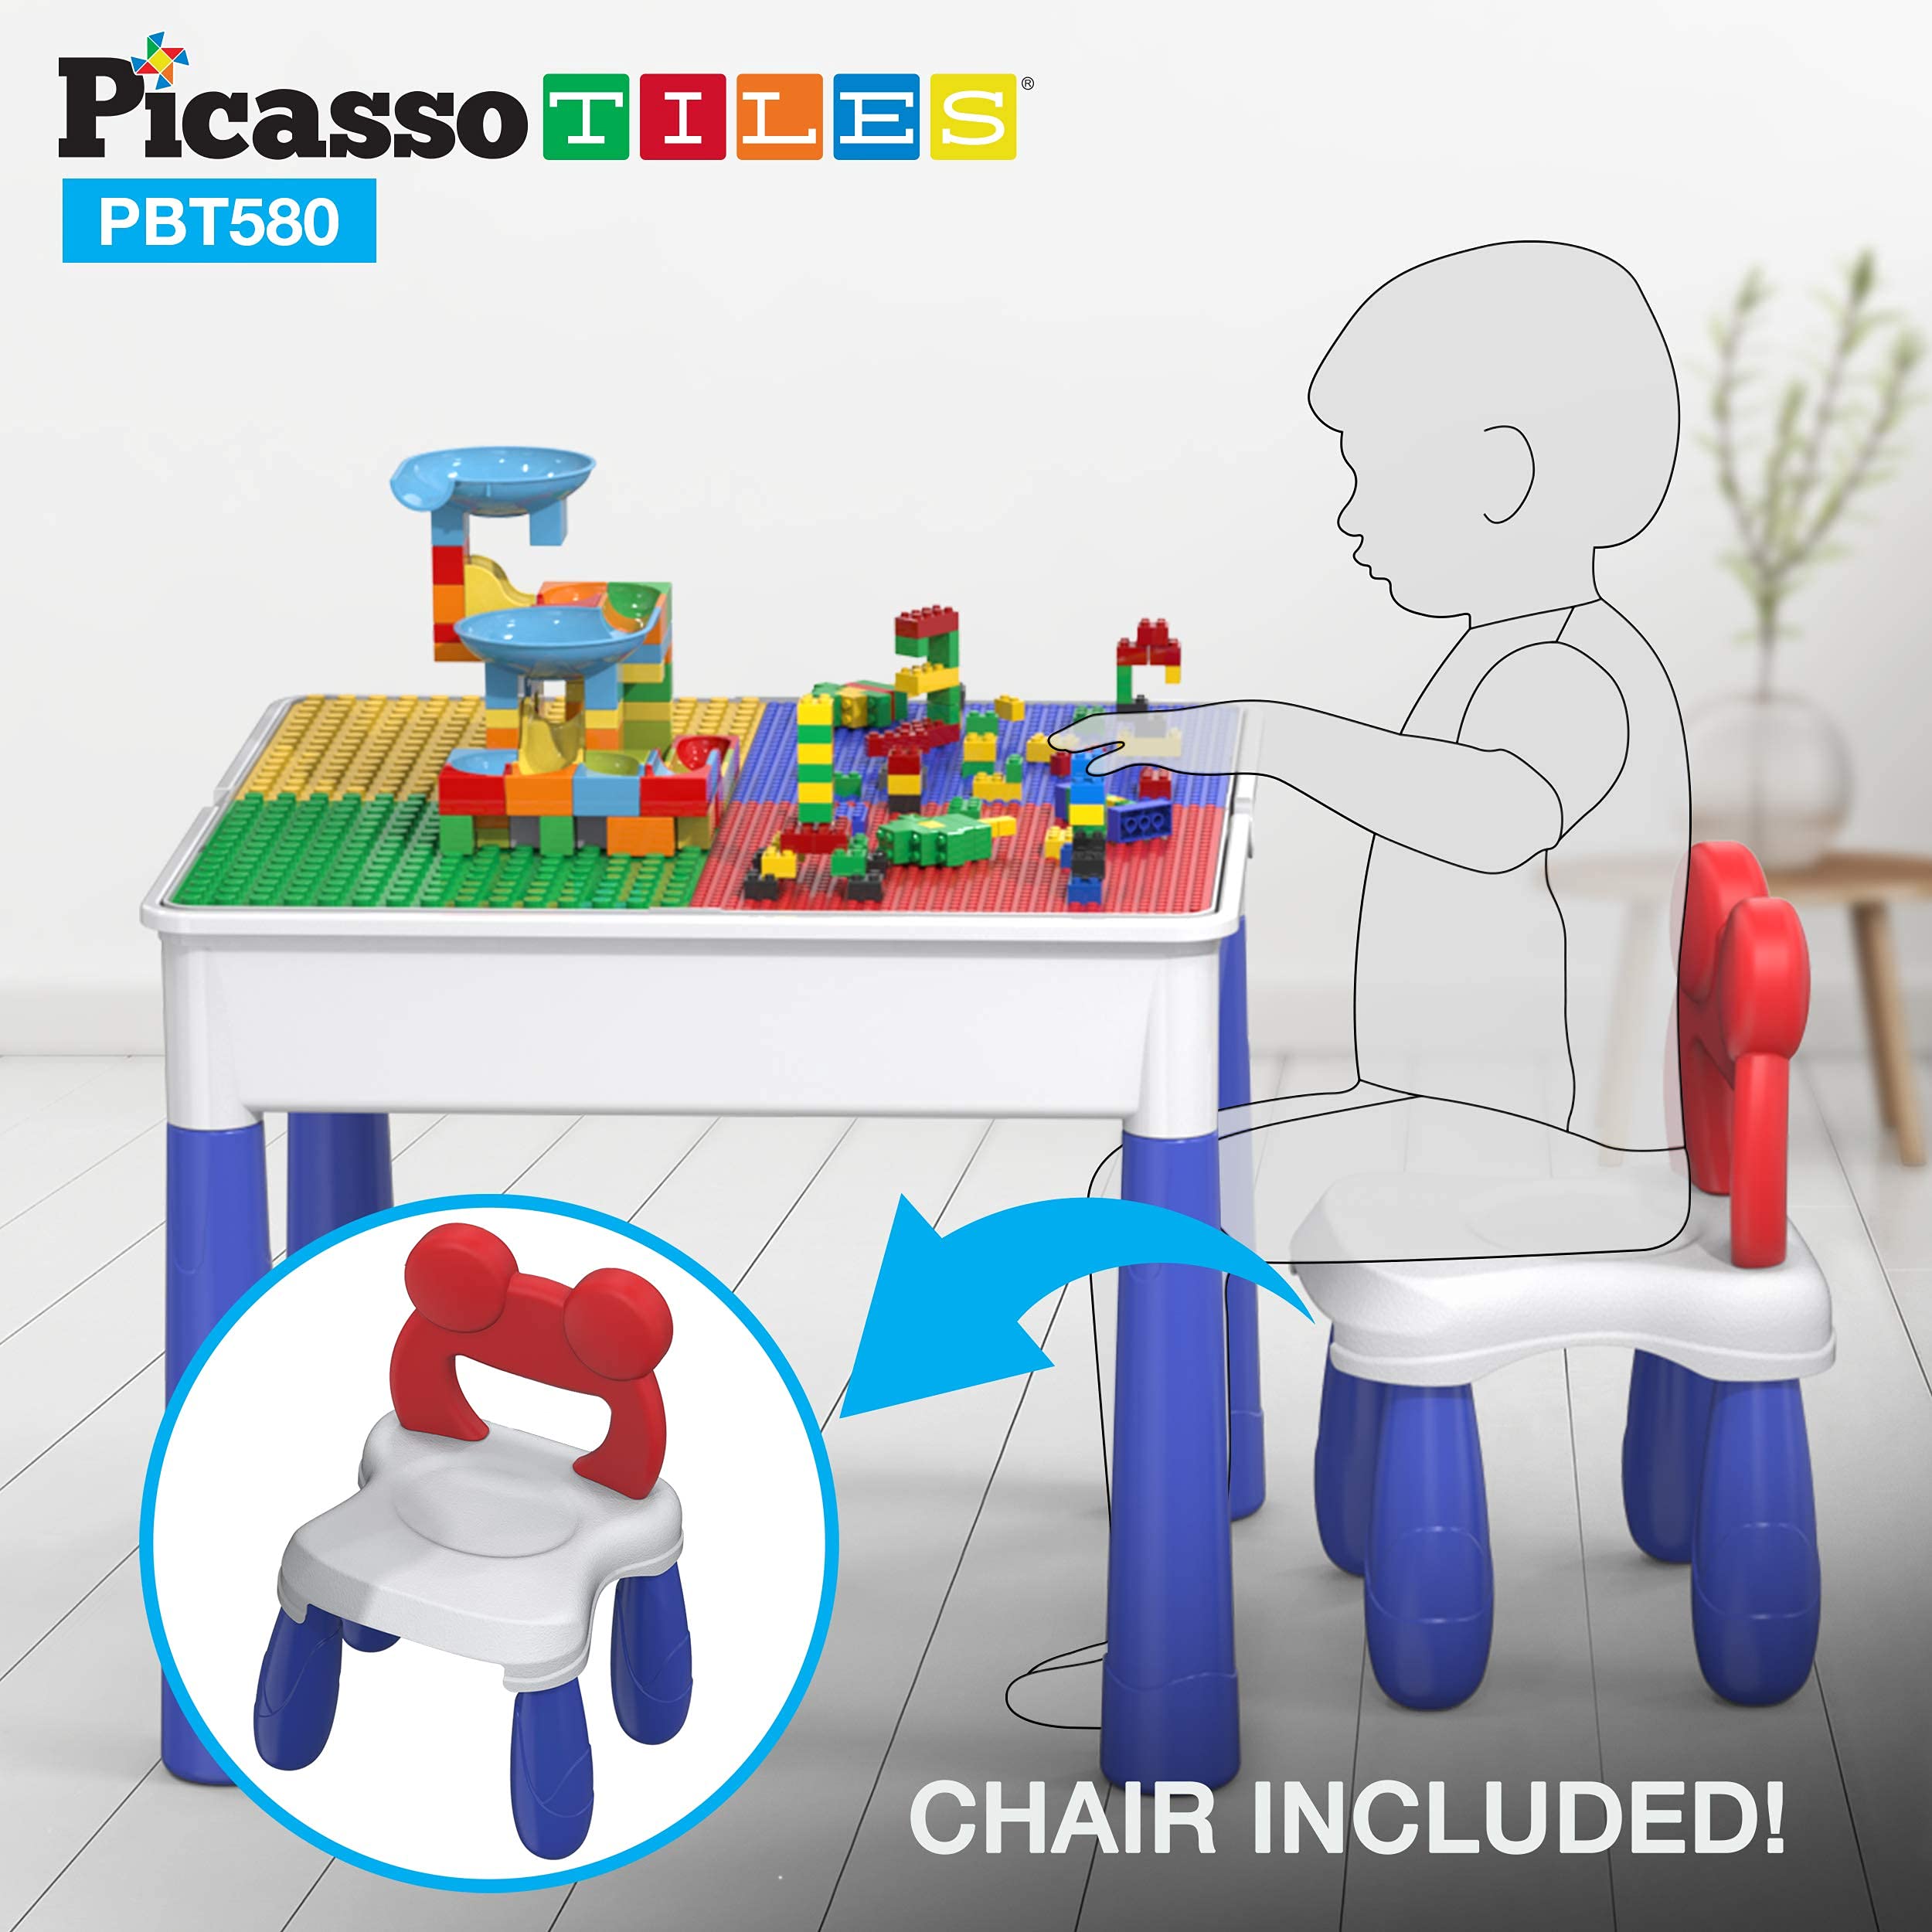 PicassoTiles Magnetic Drawing Board + Table & Chair Set with Storage, 12x10 inch Large 748 Bead Magnet Tablet Pad Erasable Reusable Writing Playboard, All-in-1 581pcs Building Blocks and Marble Run